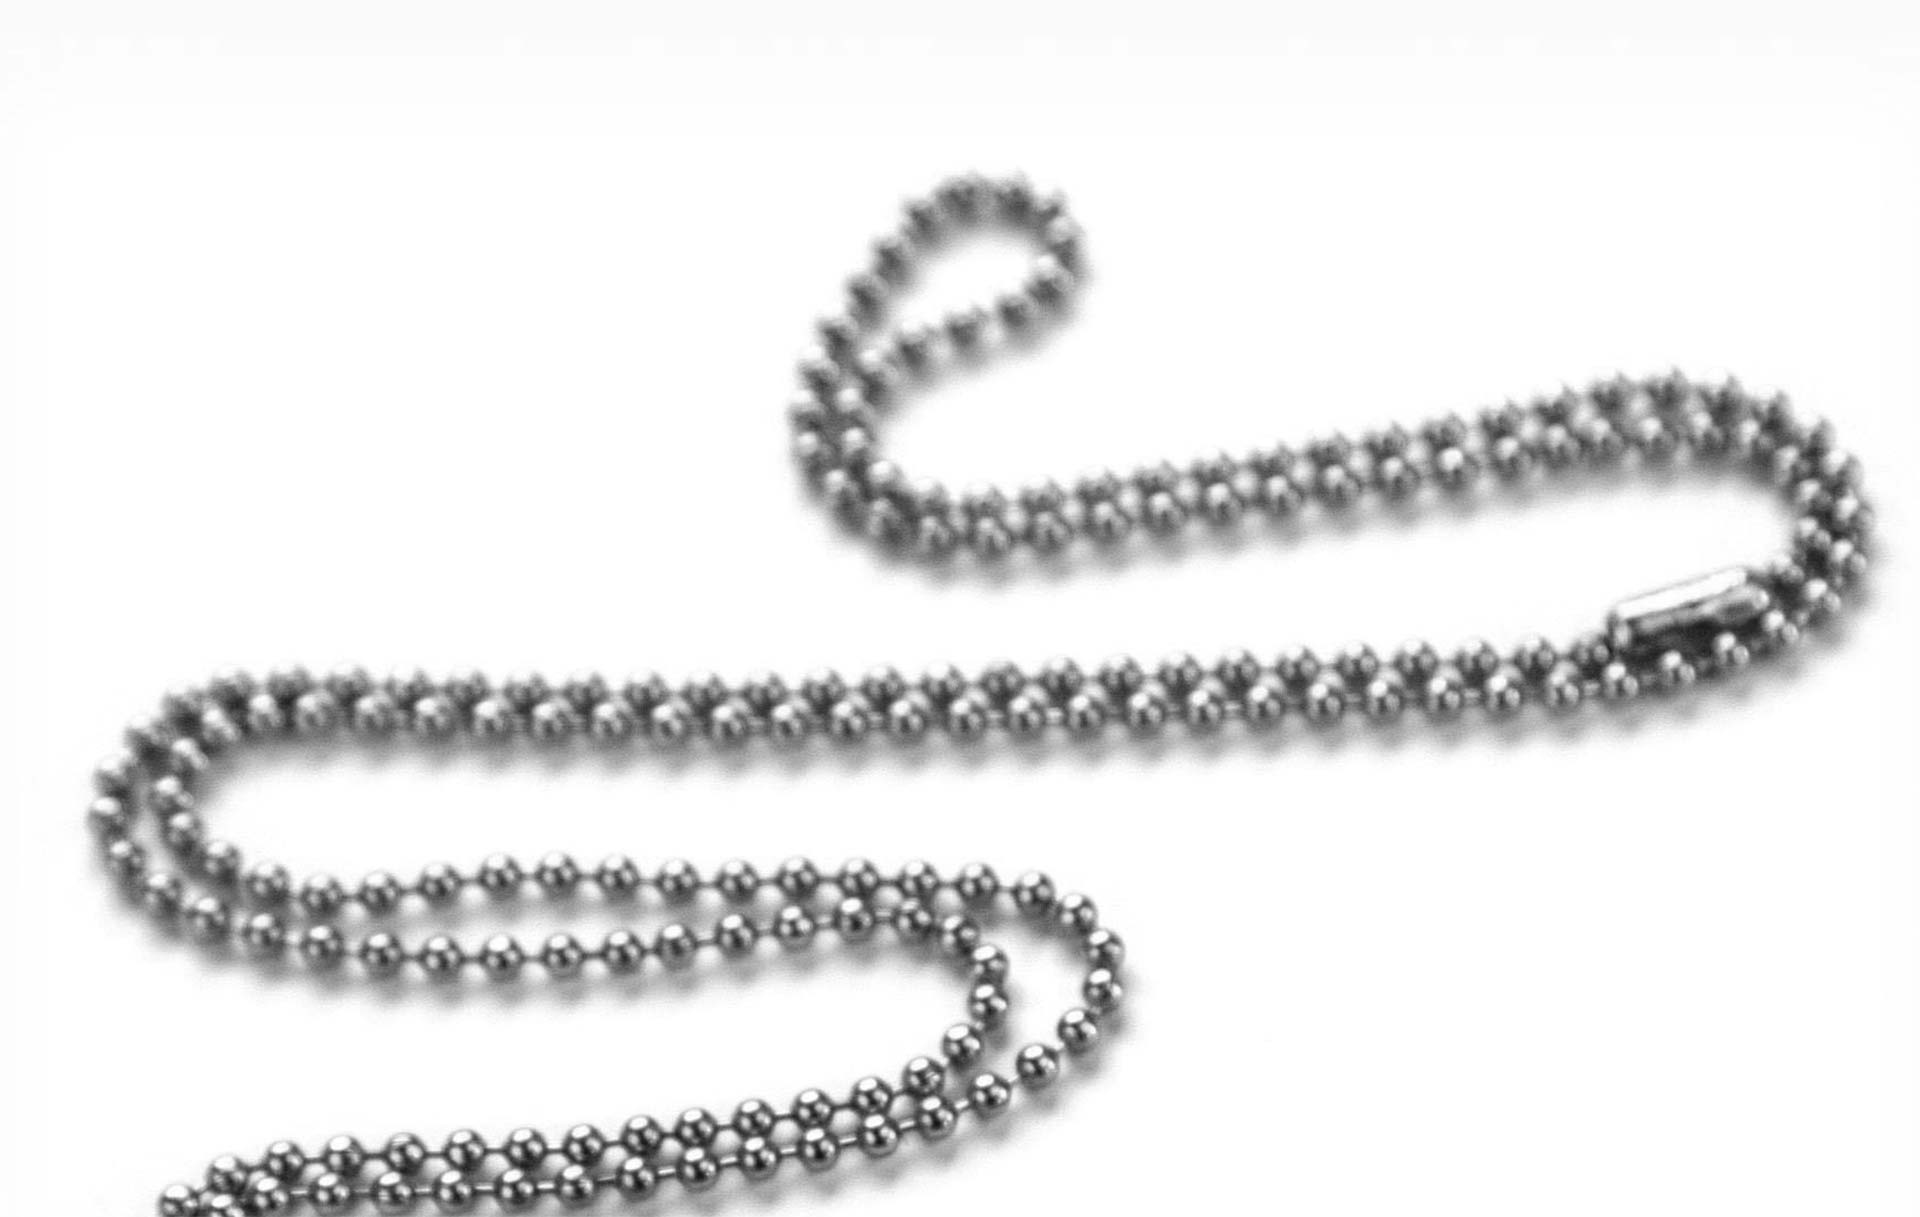 FIXX iD Replacement Chain